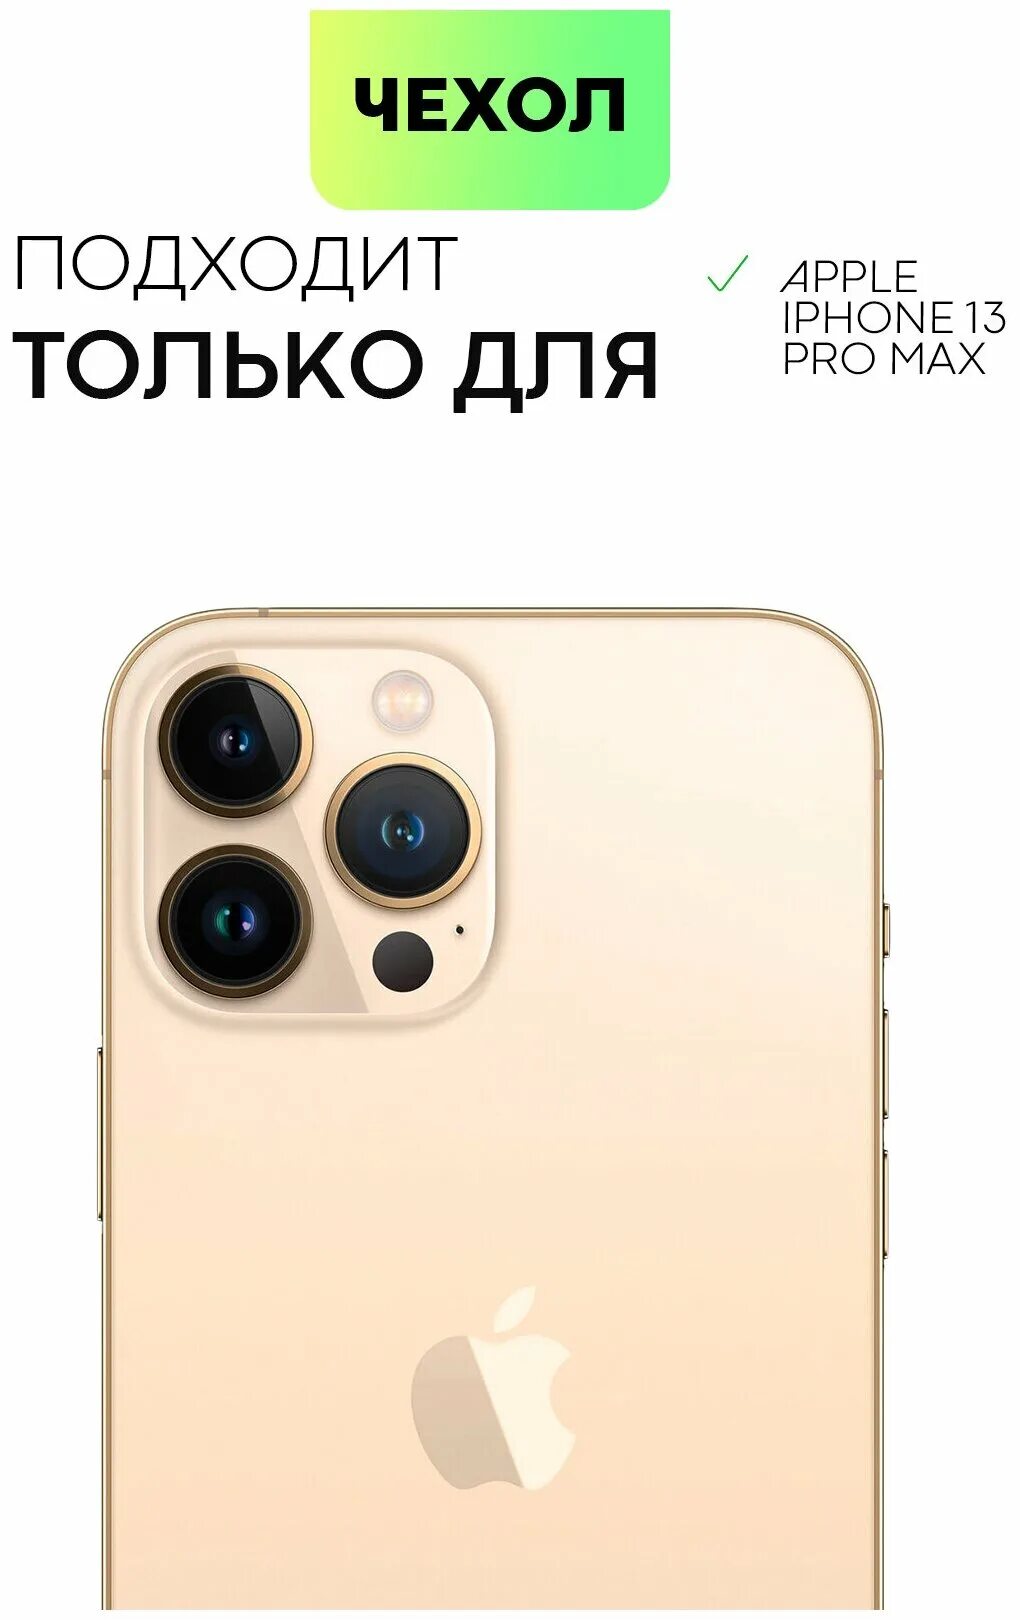 Iphone 11 512. Iphone 11 Pro Max. Iphone 11 Pro Max 64gb Silver. Iphone 11 Pro Max 256gb. Apple iphone 11 Pro 64gb.